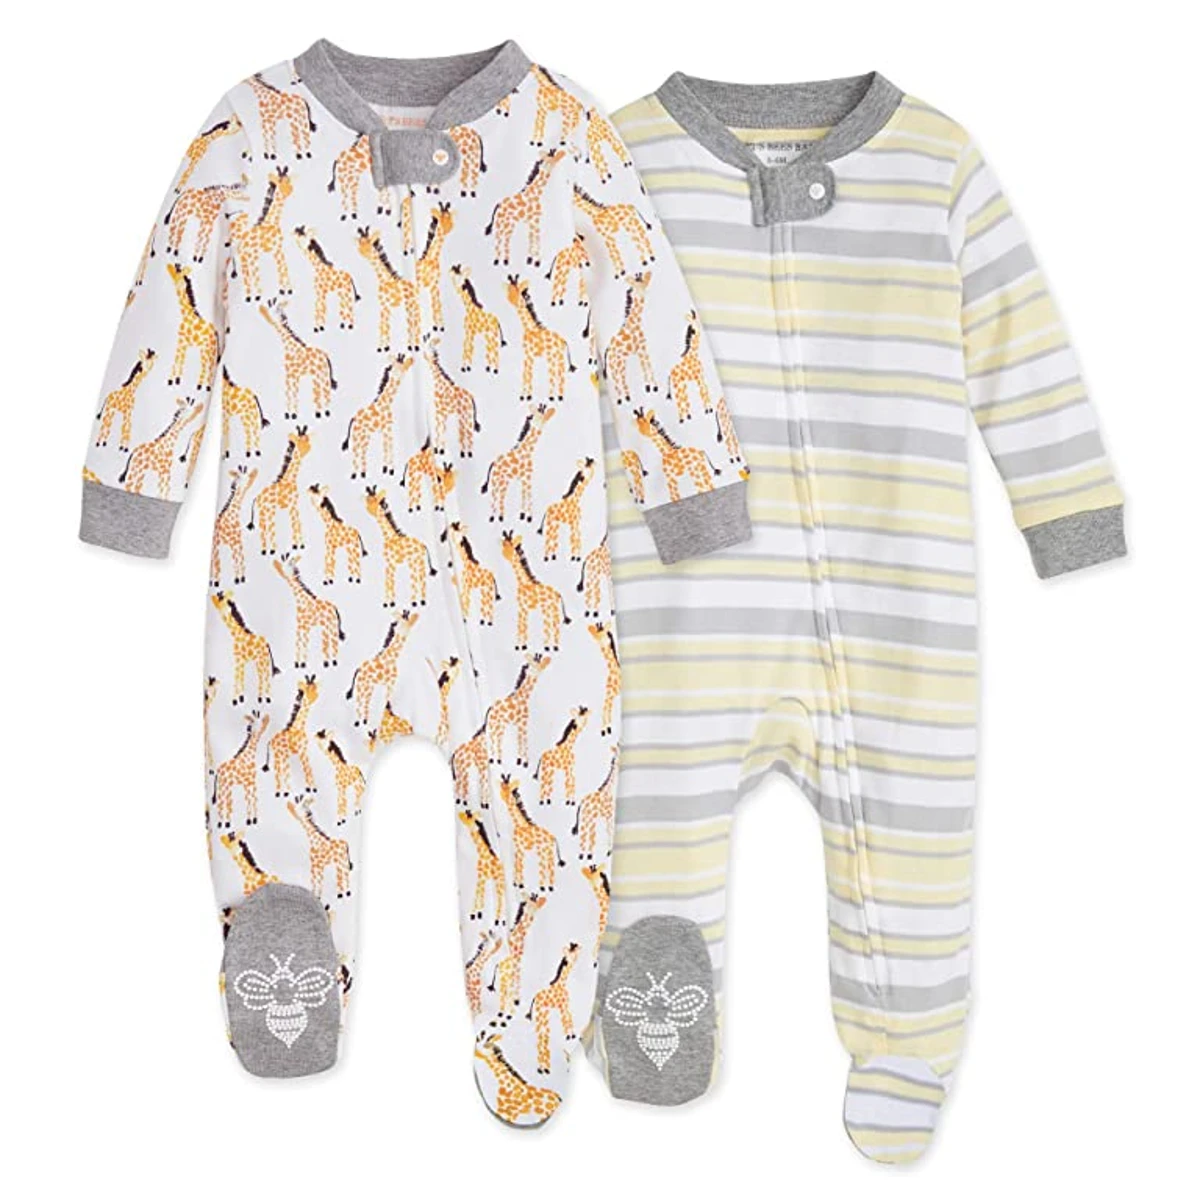 Burts Bees Baby Baby Boys Sleep and Play Pjs 100 Organic Cotton One Piece Romper Jumpsuit Zip Front Pajamas